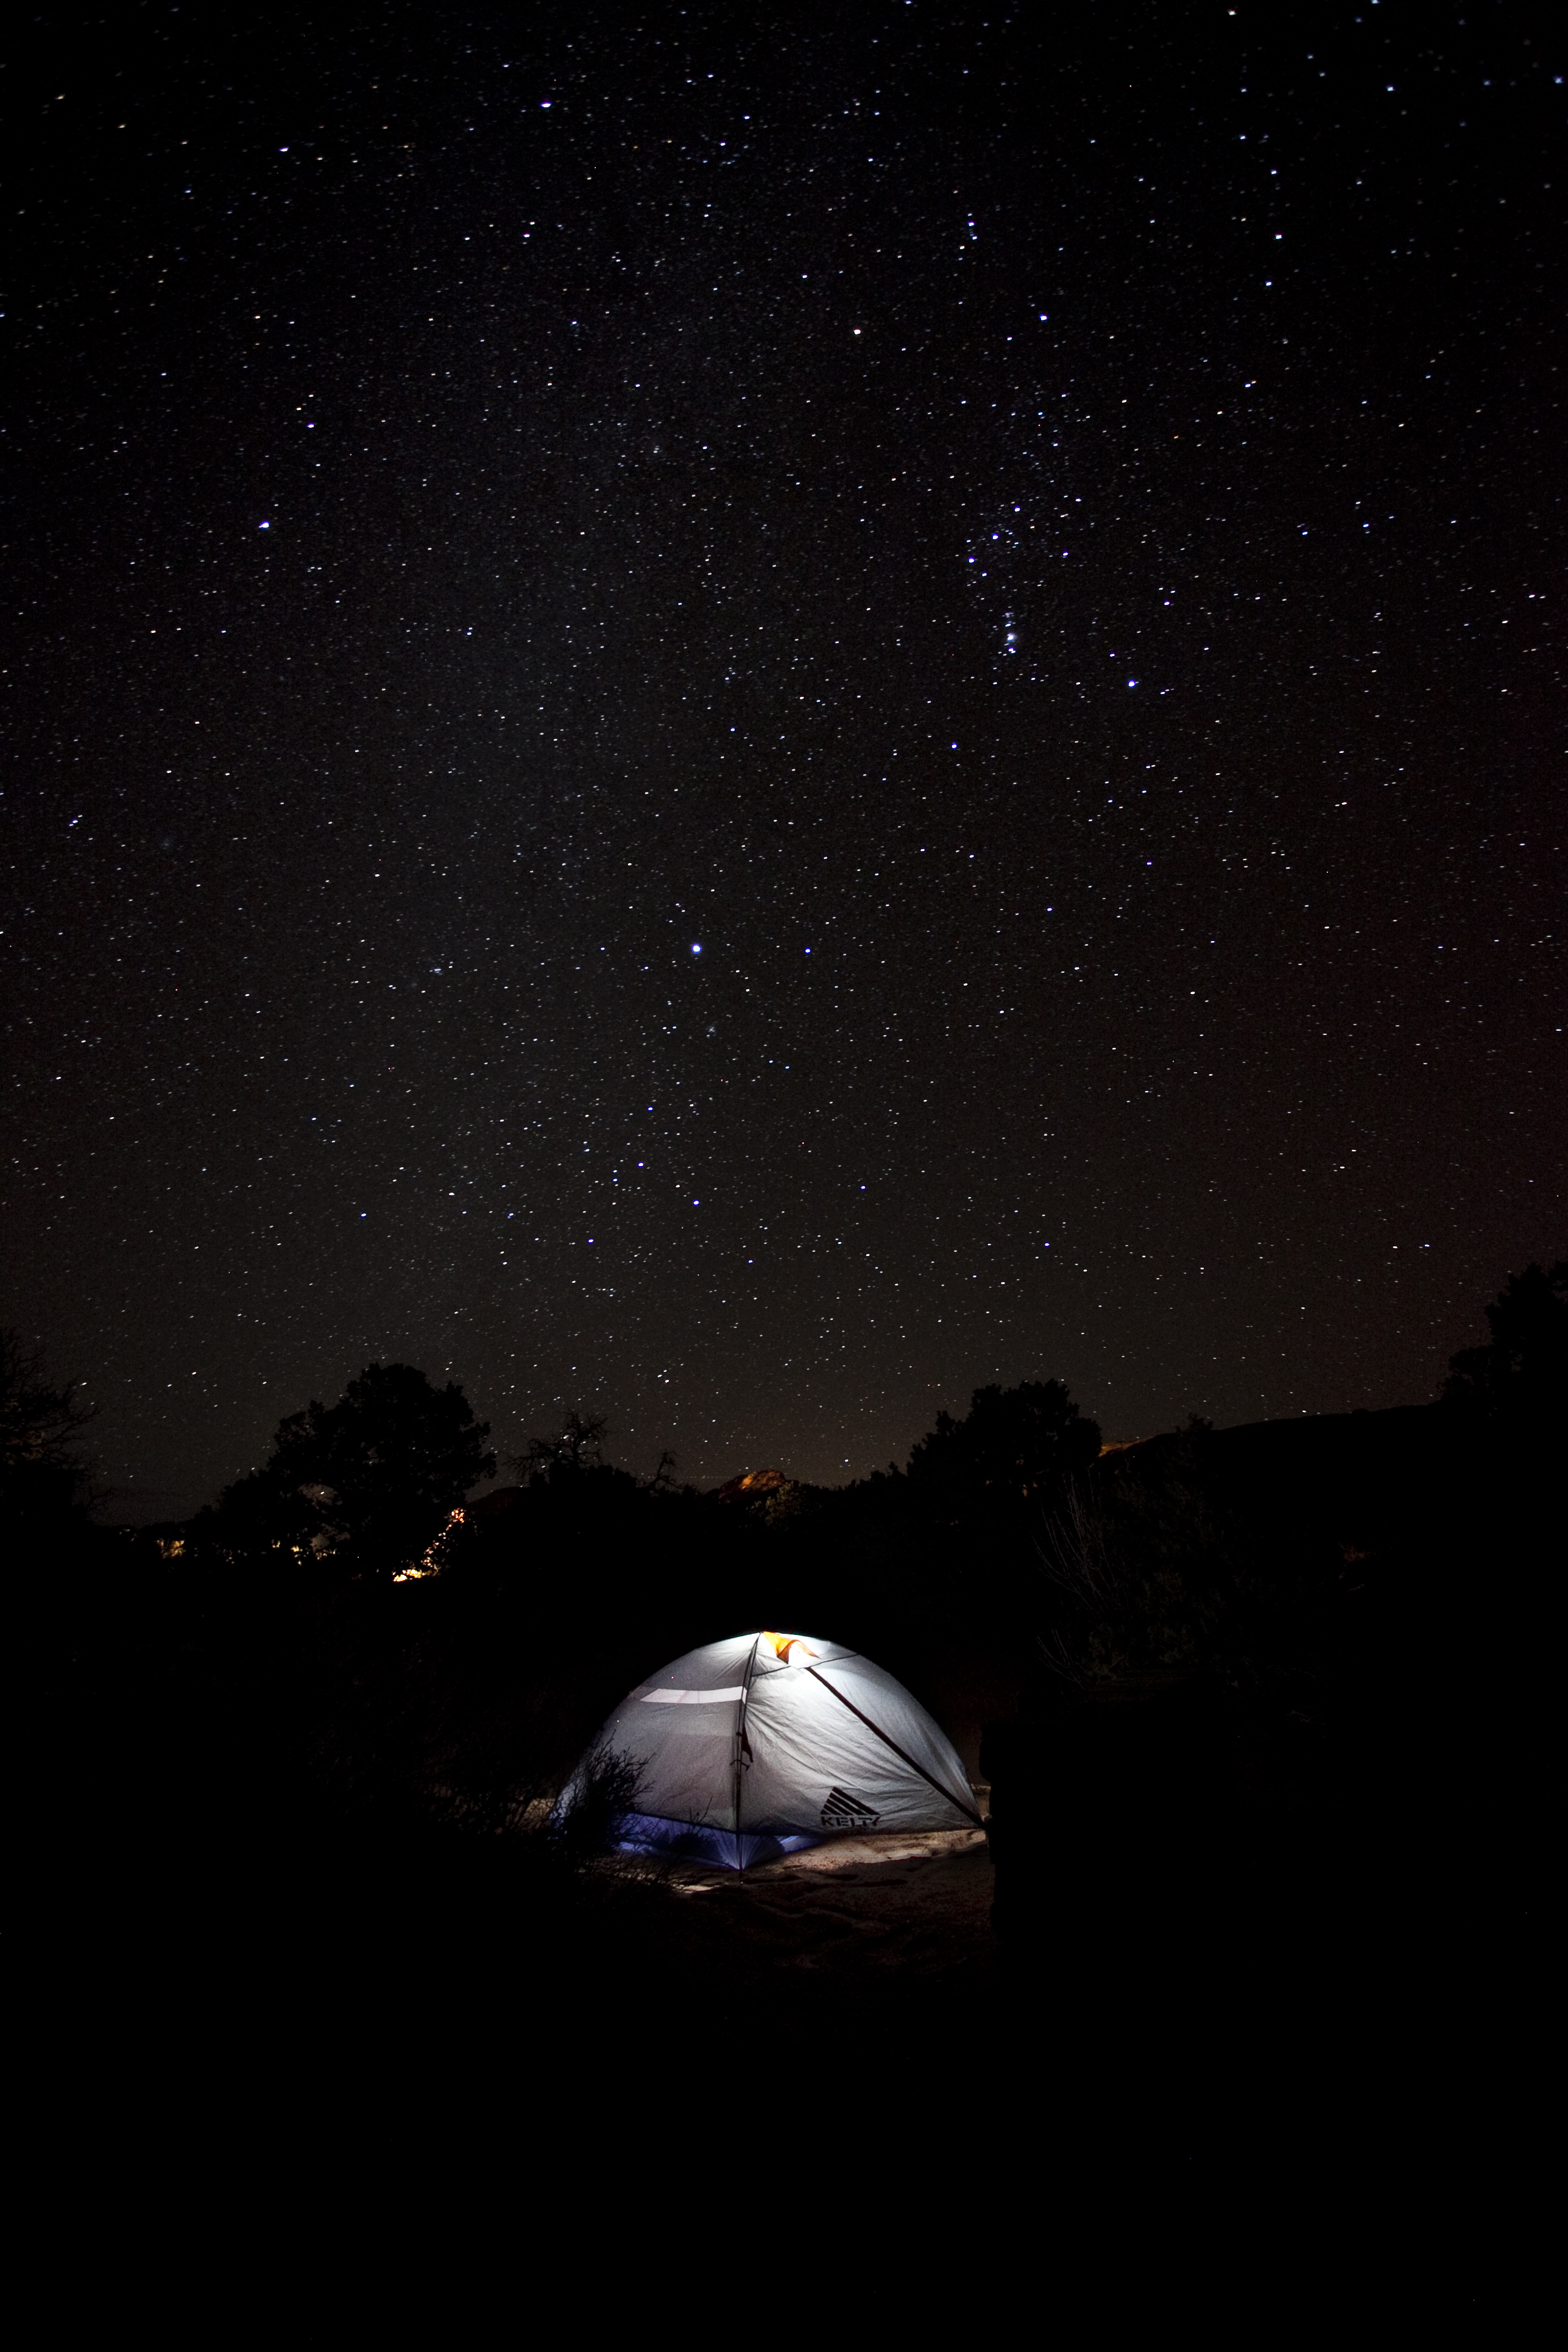 camping, tent, campsite, night, nature, starry sky